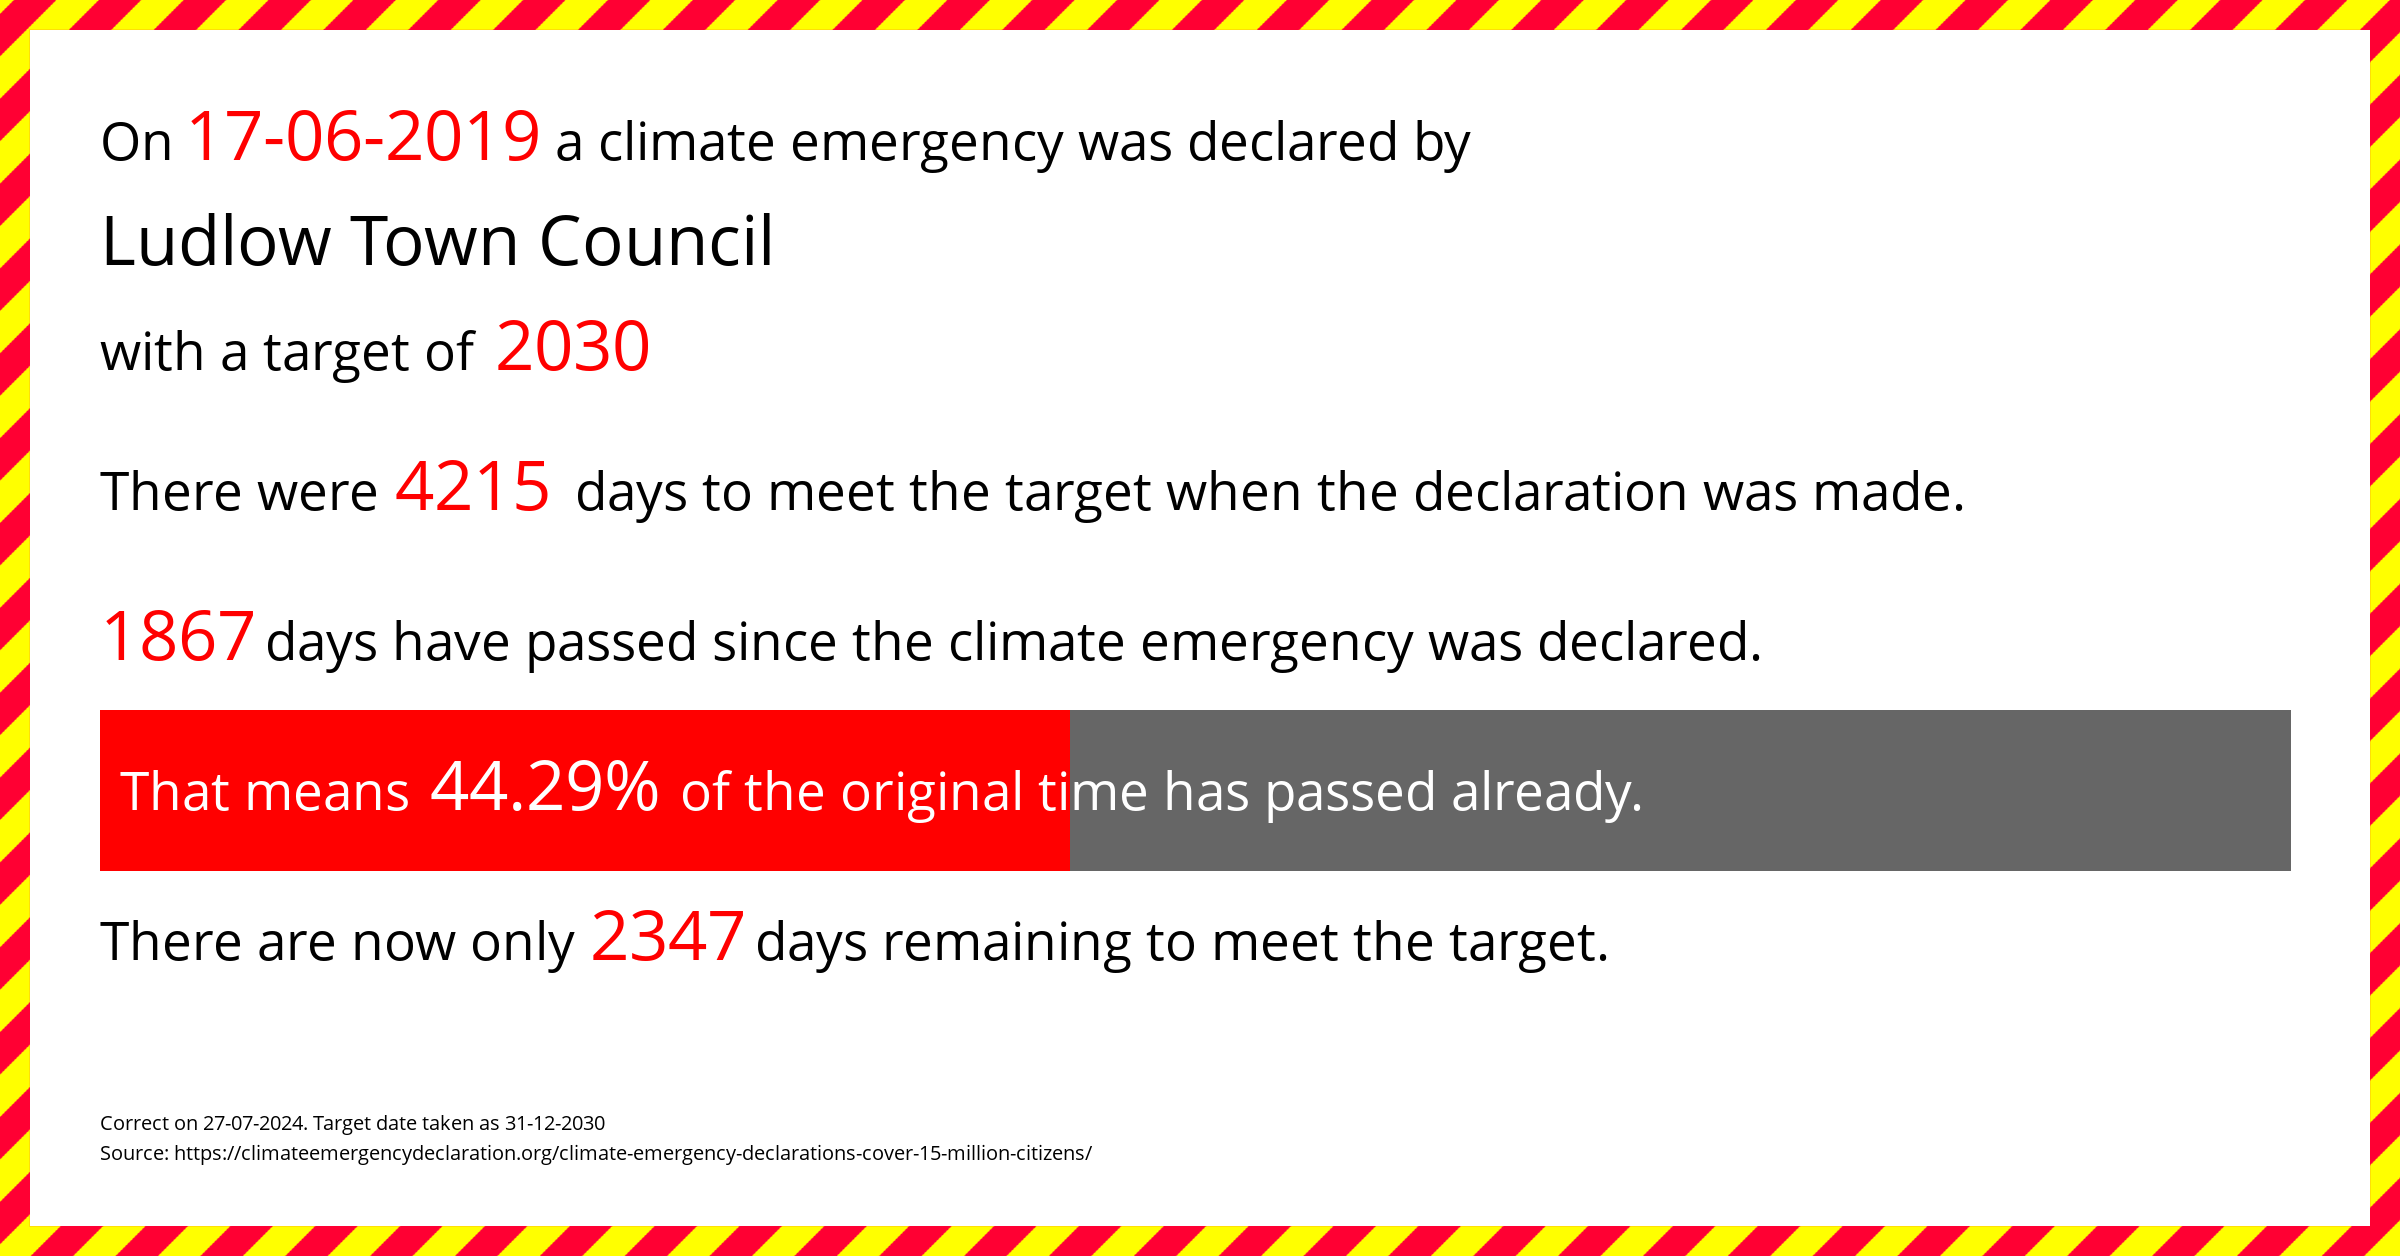 Ludlow Town Council declared a Climate emergency on Monday 17th June 2019, with a target of 2030.